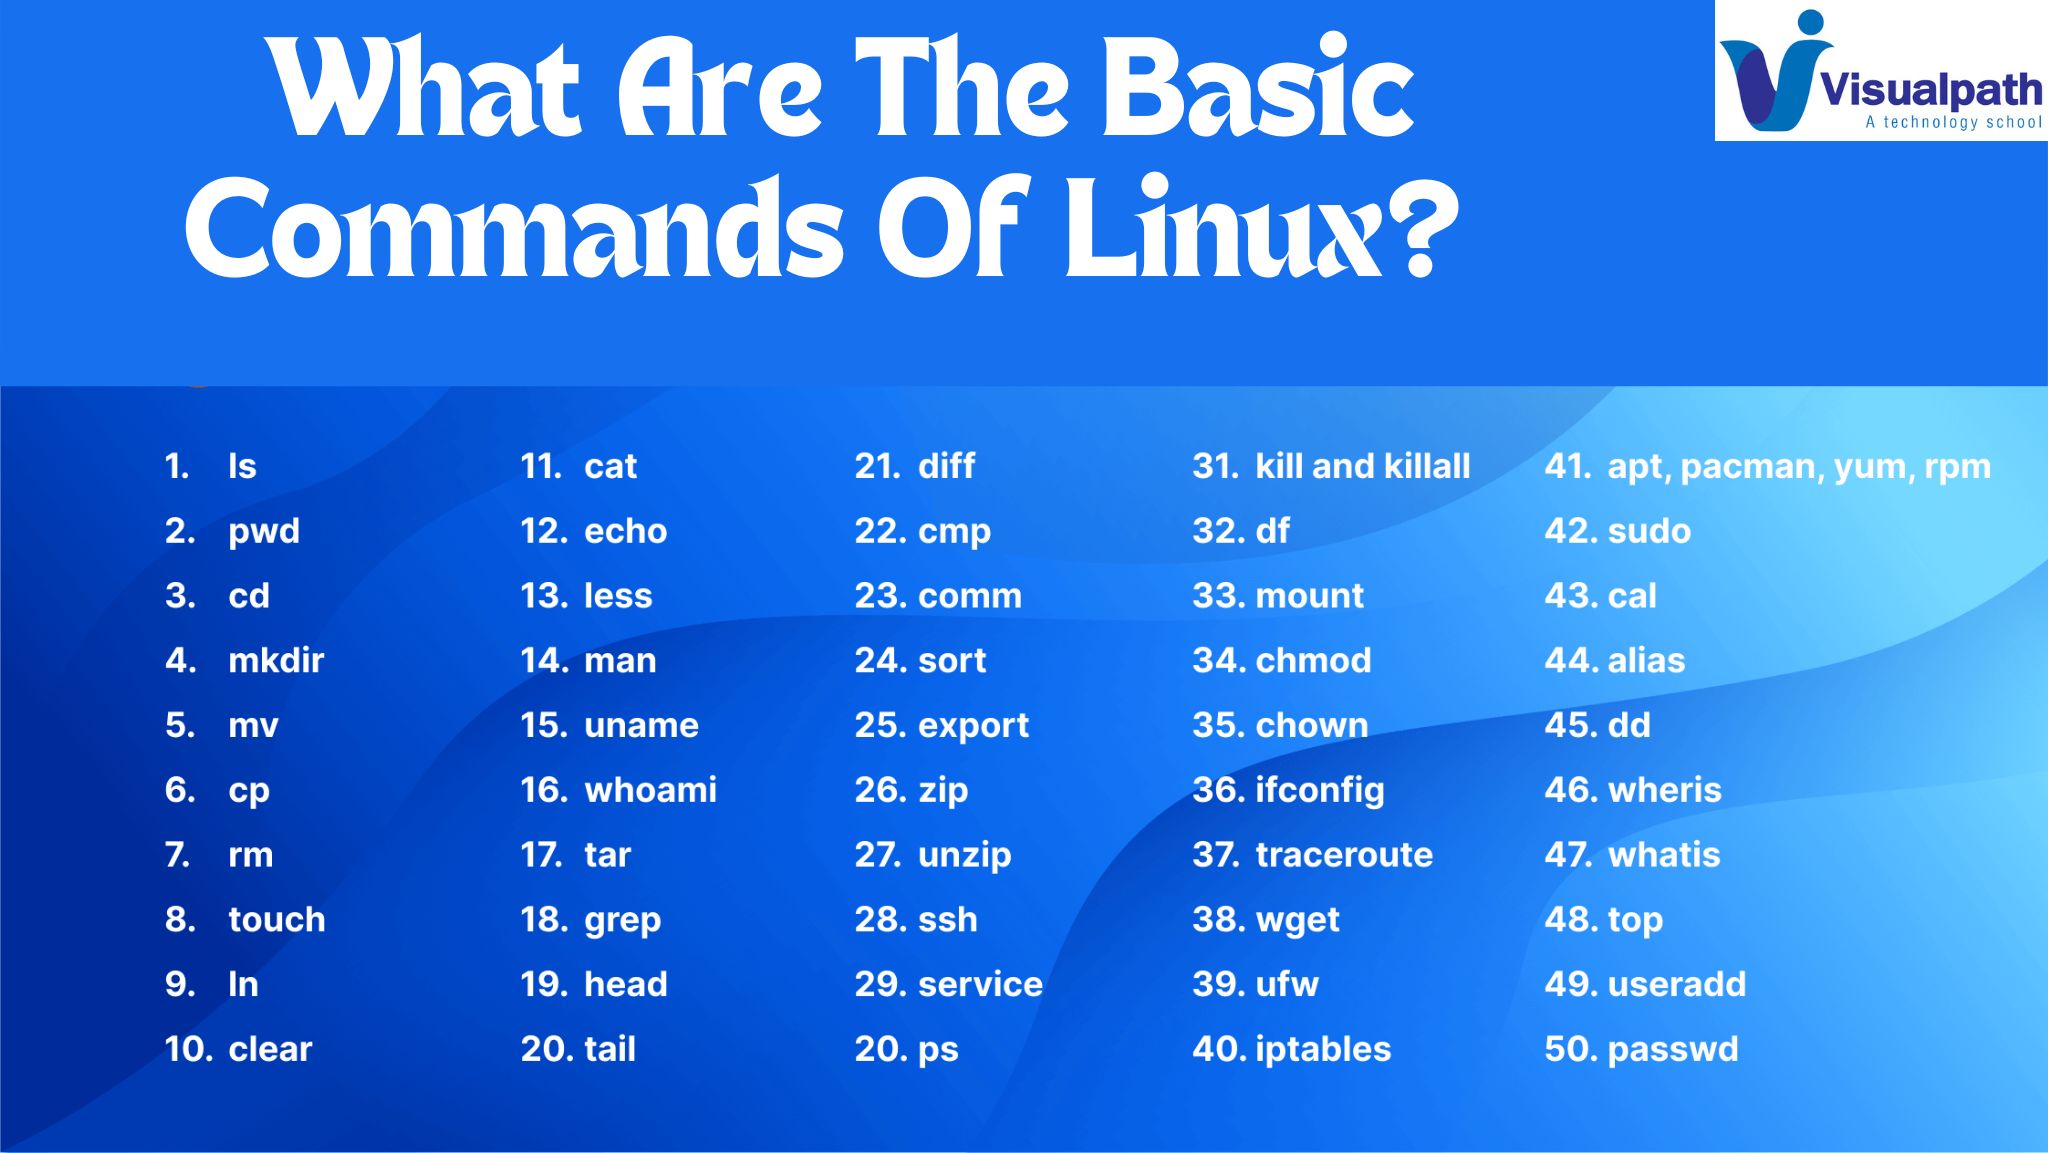 What Are The Basic Commands Of Linux?